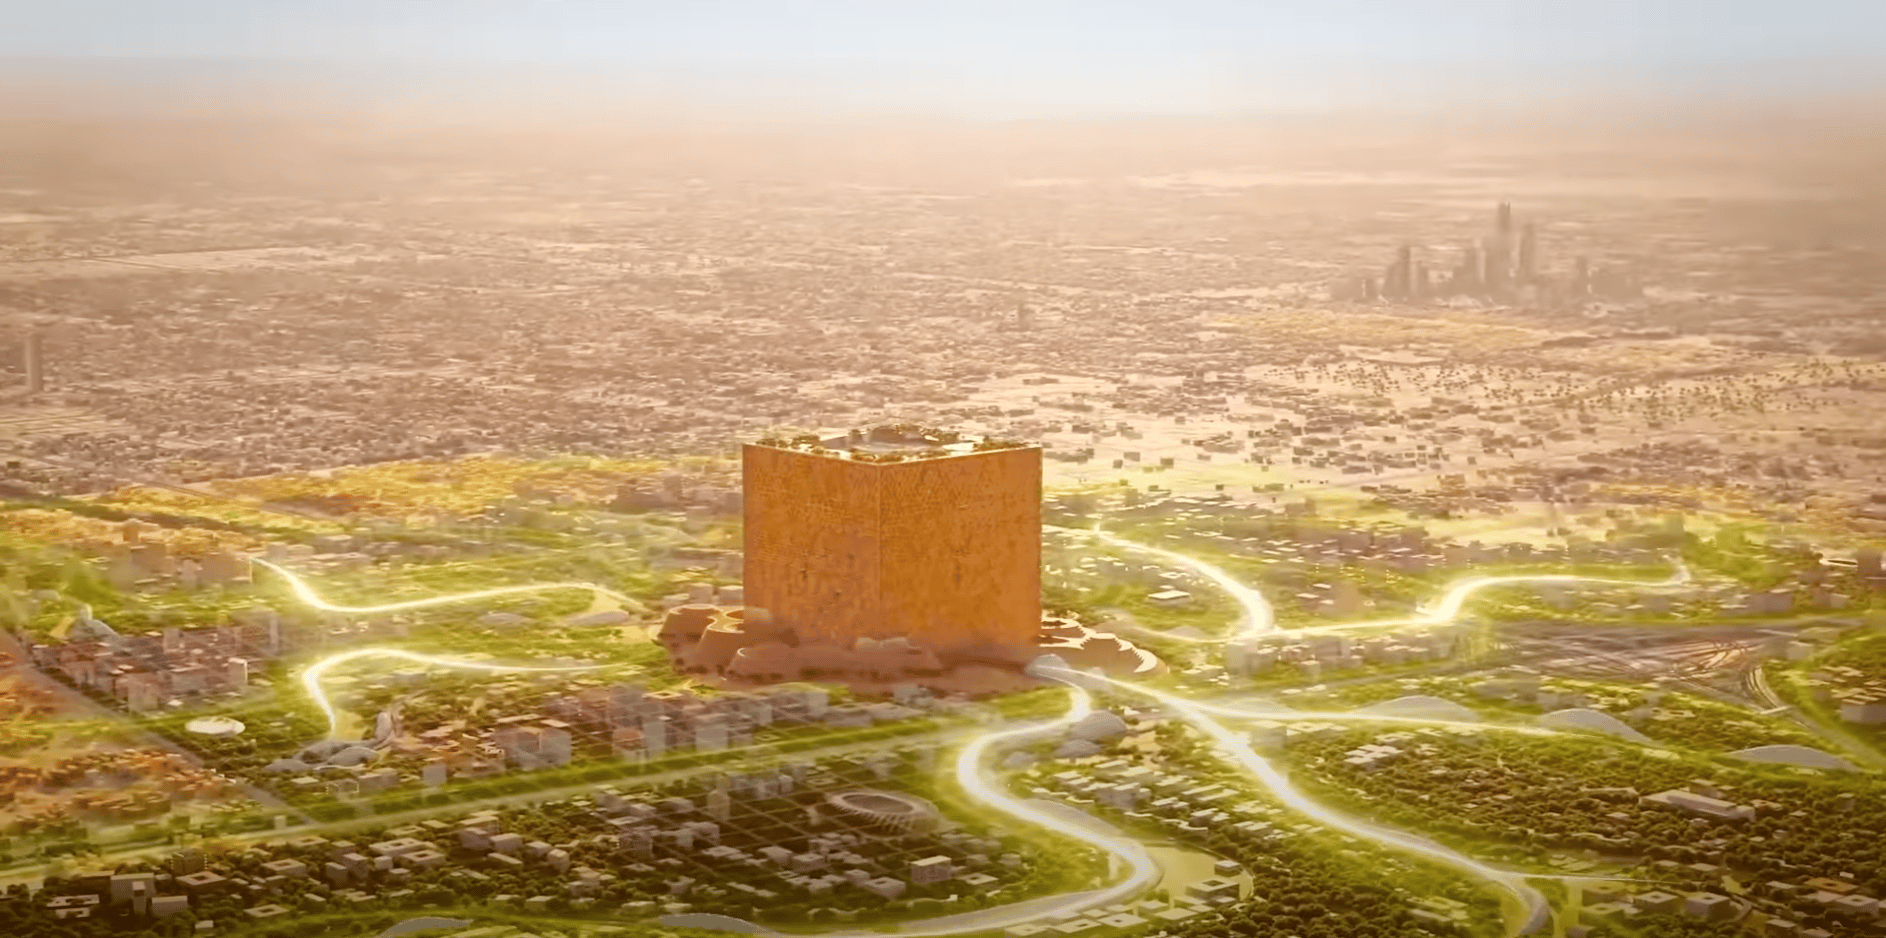 (WATCH) Saudi Arabia is about to construct a towering 1,300 sq foot ‘virtual reality’ cube